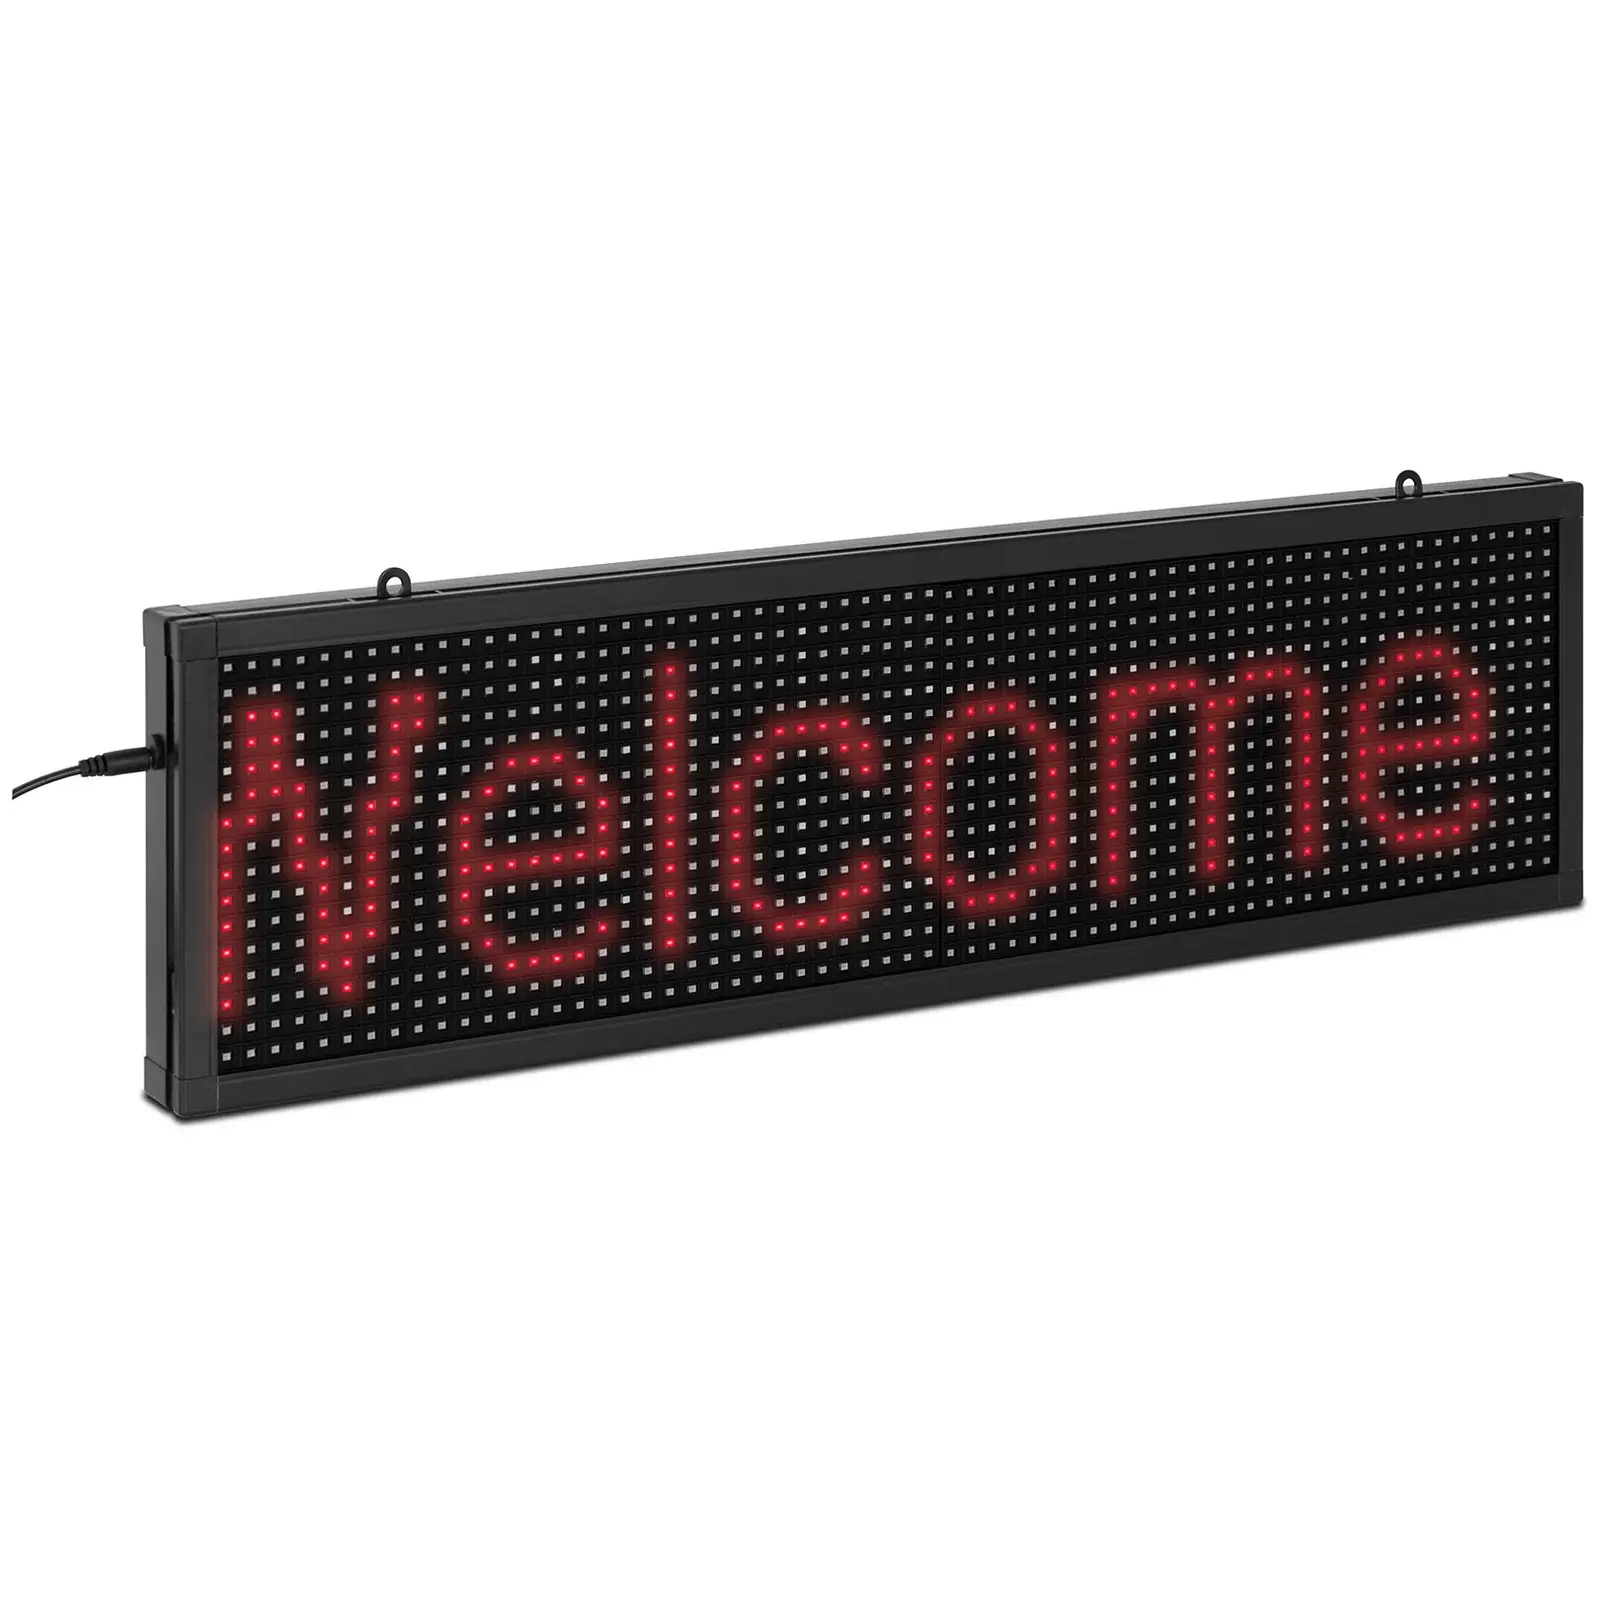 LED Display Board - 64 x 16 red LEDs - 67 x 19 cm - programmable via iOS / Android